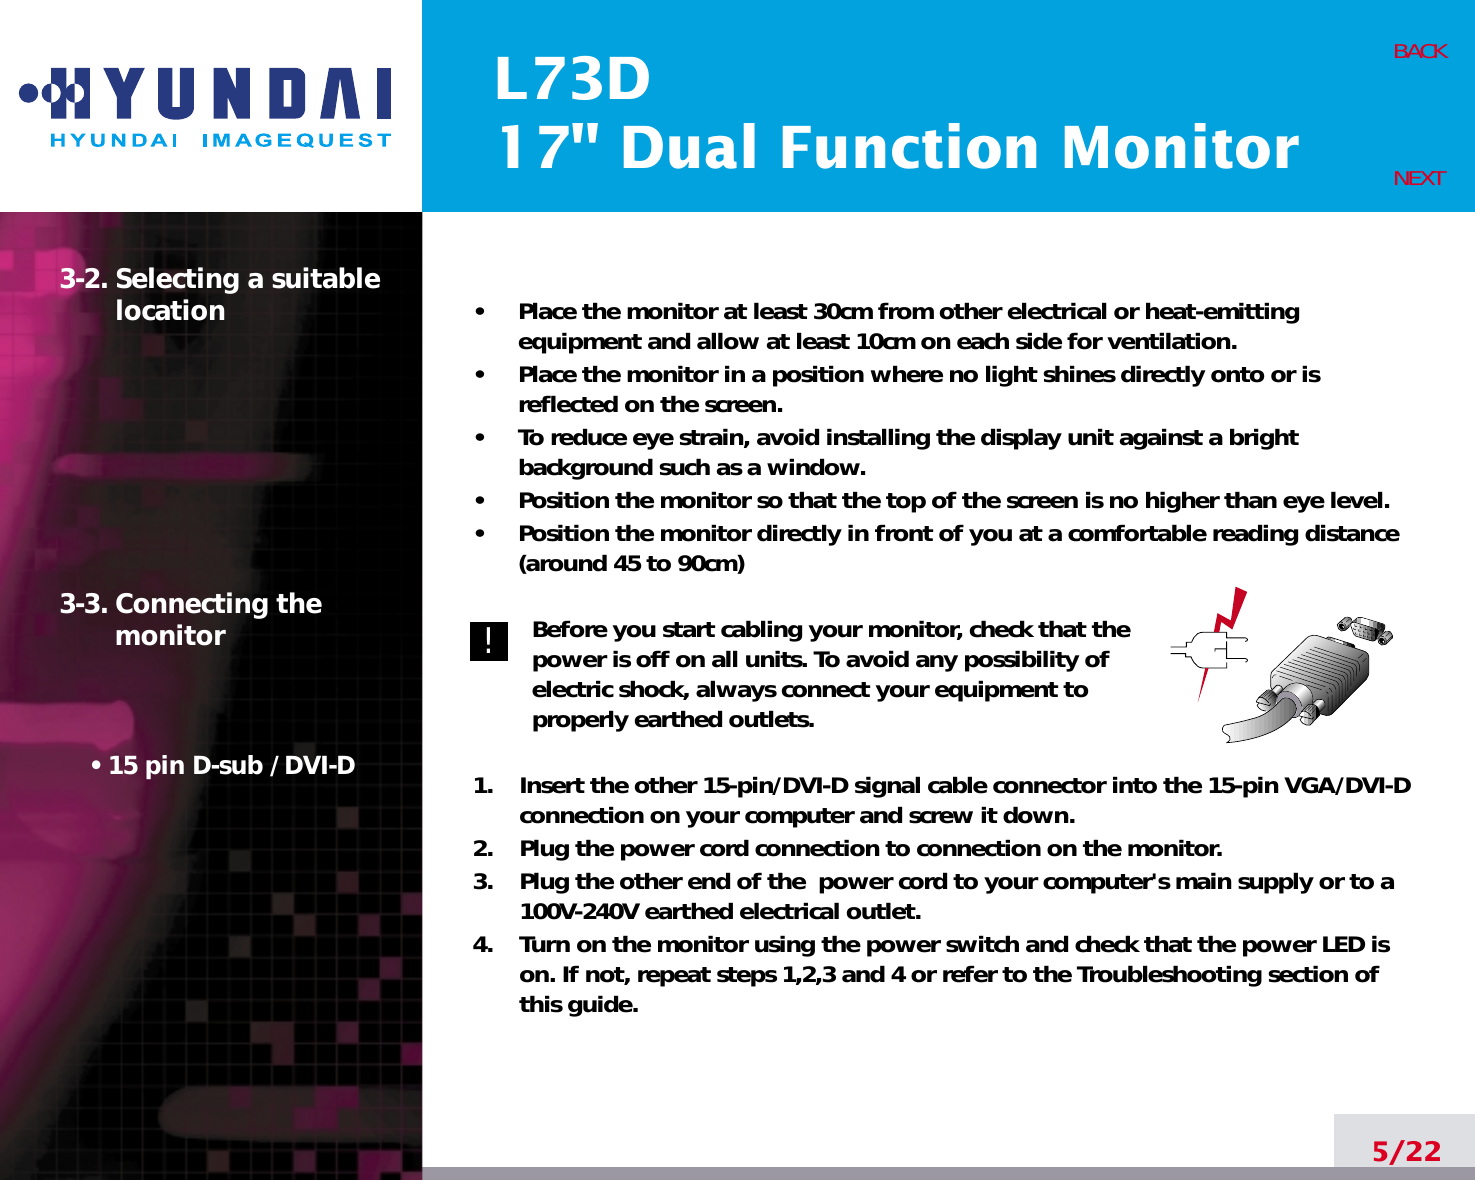 L73D17&quot; Dual Function Monitor5/22BACKNEXT3-2. Selecting a suitablelocation3-3. Connecting the monitor• 15 pin D-sub / DVI-D•     Place the monitor at least 30cm from other electrical or heat-emittingequipment and allow at least 10cm on each side for ventilation.•     Place the monitor in a position where no light shines directly onto or isreflected on the screen.•     To reduce eye strain, avoid installing the display unit against a brightbackground such as a window.•     Position the monitor so that the top of the screen is no higher than eye level.•     Position the monitor directly in front of you at a comfortable reading distance(around 45 to 90cm) Before you start cabling your monitor, check that thepower is off on all units. To avoid any possibility ofelectric shock, always connect your equipment toproperly earthed outlets.1.    Insert the other 15-pin/DVI-D signal cable connector into the 15-pin VGA/DVI-Dconnection on your computer and screw it down. 2.    Plug the power cord connection to connection on the monitor.3.    Plug the other end of the  power cord to your computer&apos;s main supply or to a100V-240V earthed electrical outlet.4.    Turn on the monitor using the power switch and check that the power LED ison. If not, repeat steps 1,2,3 and 4 or refer to the Troubleshooting section ofthis guide.!!